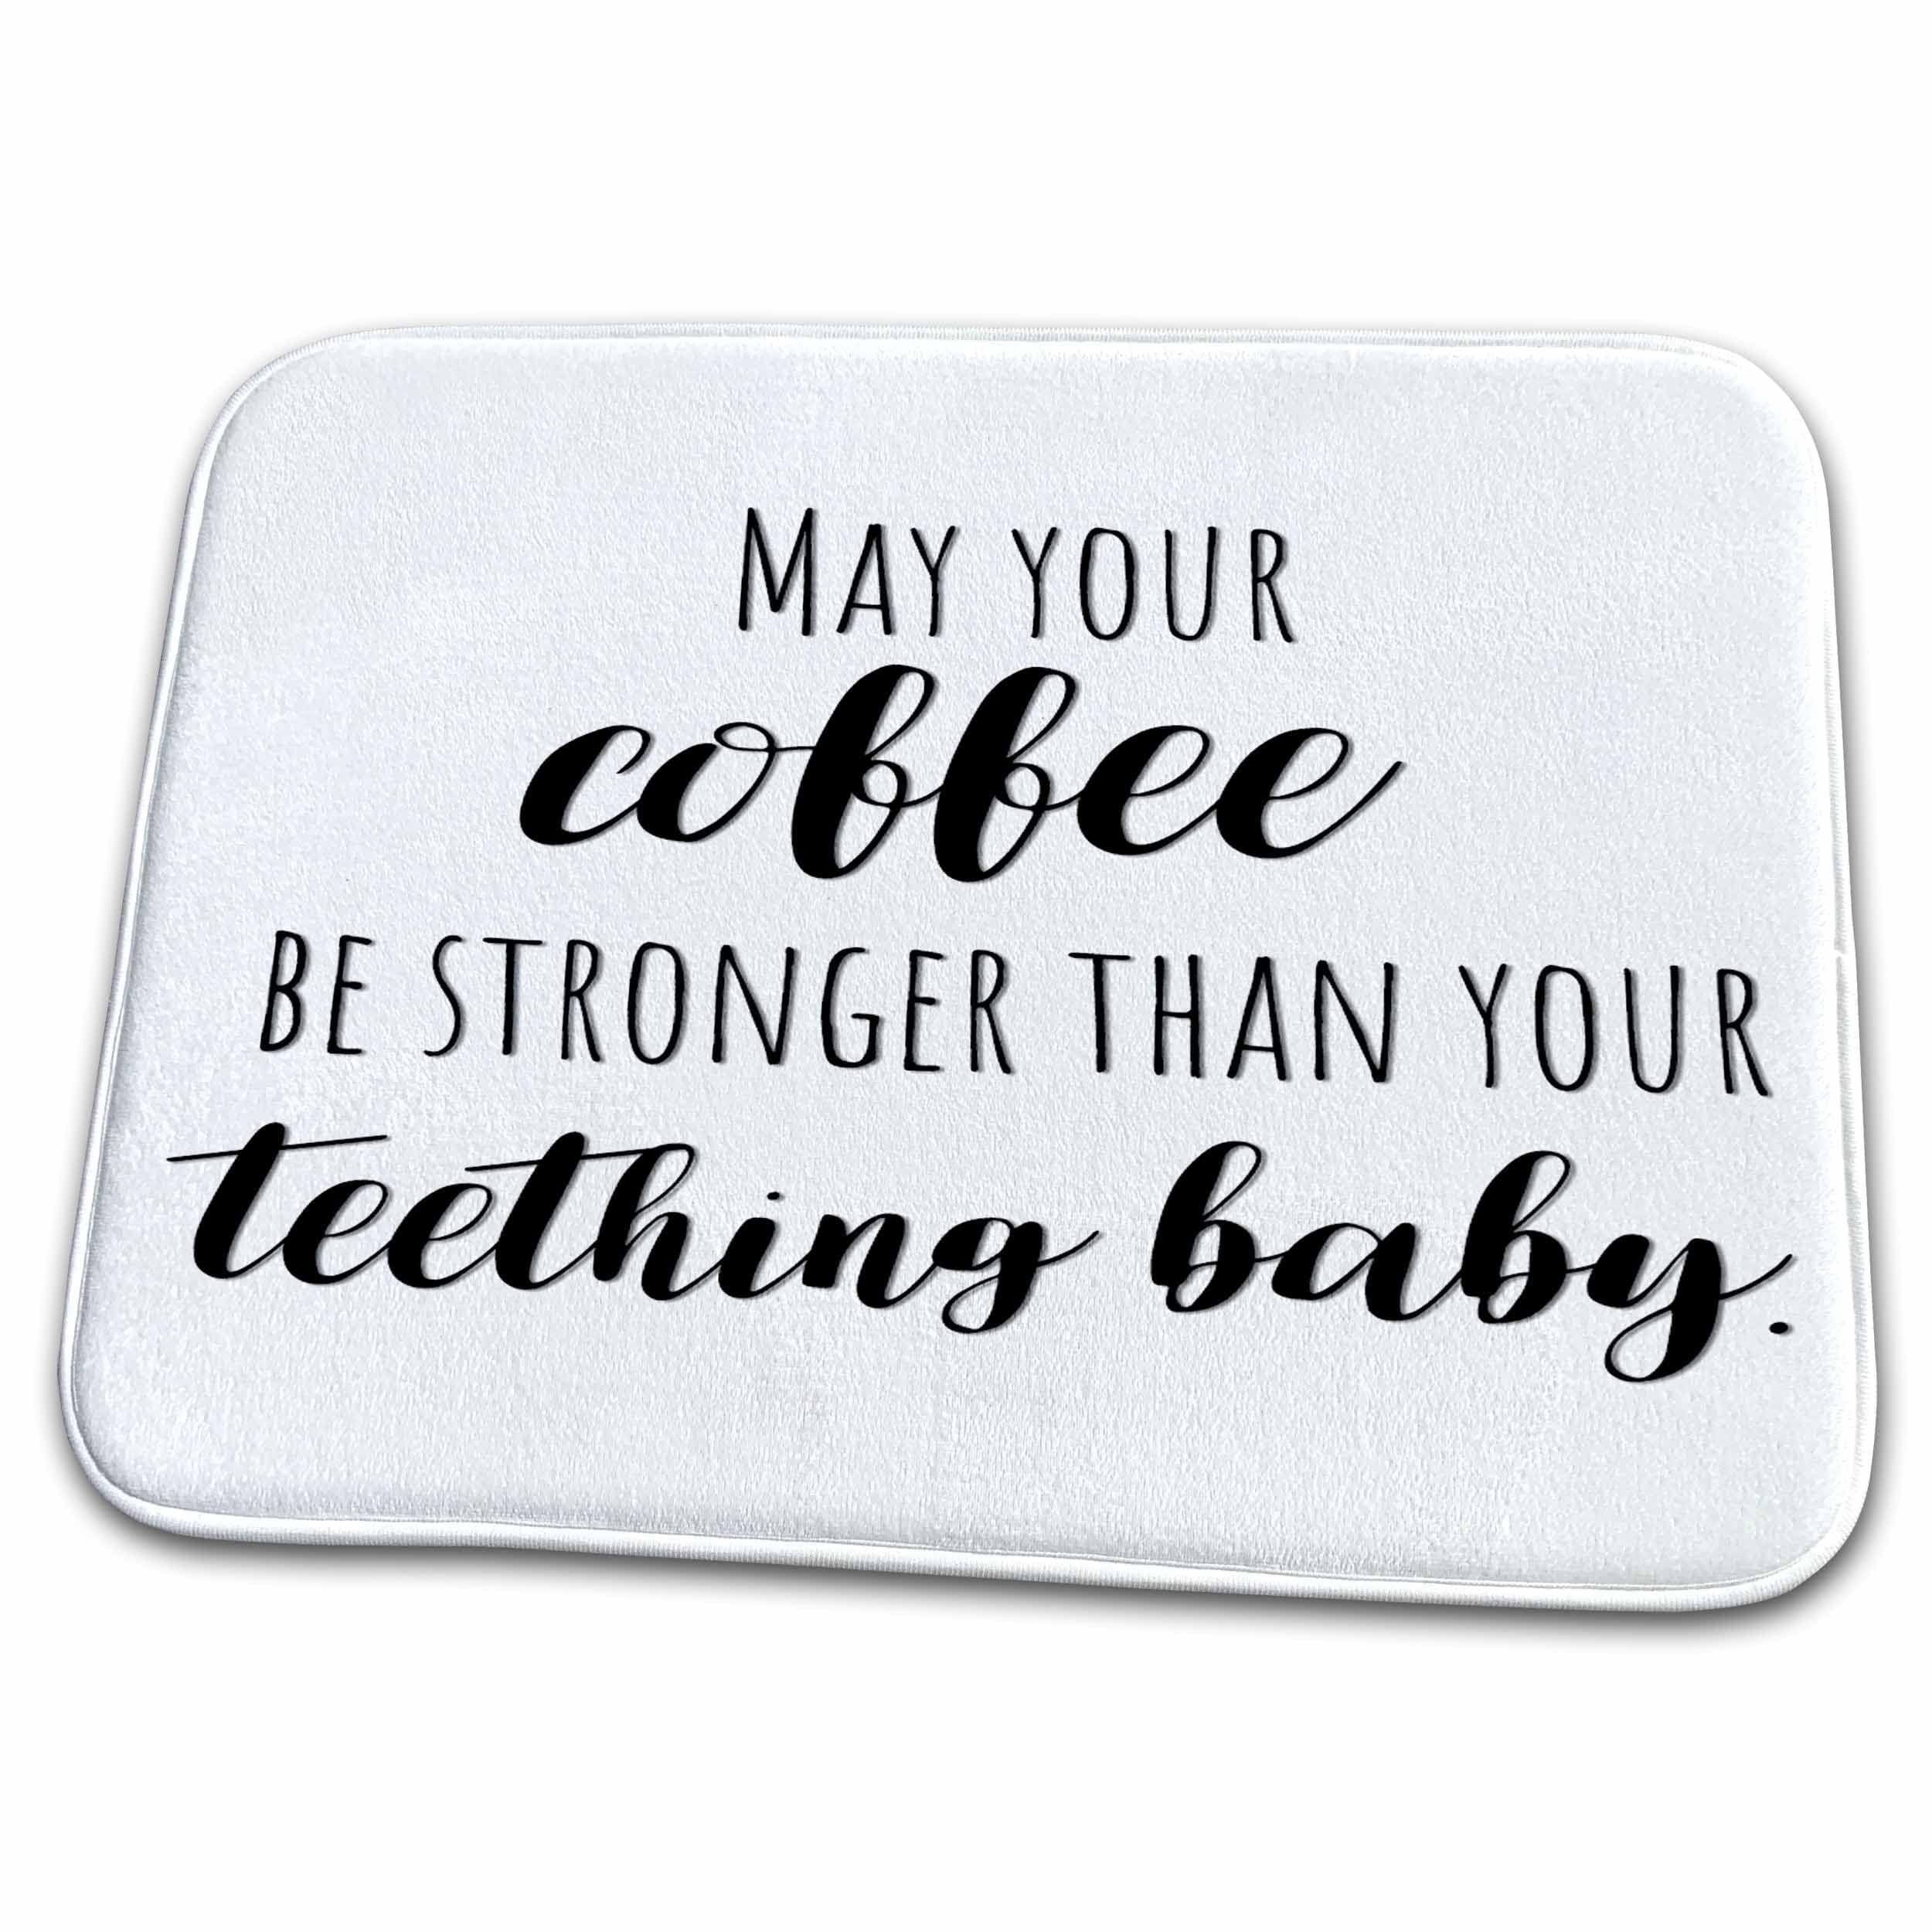 3dRose May your coffee be stronger than your teething baby. - Dish Drying  Mats (ddm-321505-1) 23x18 Dish Drying Mat